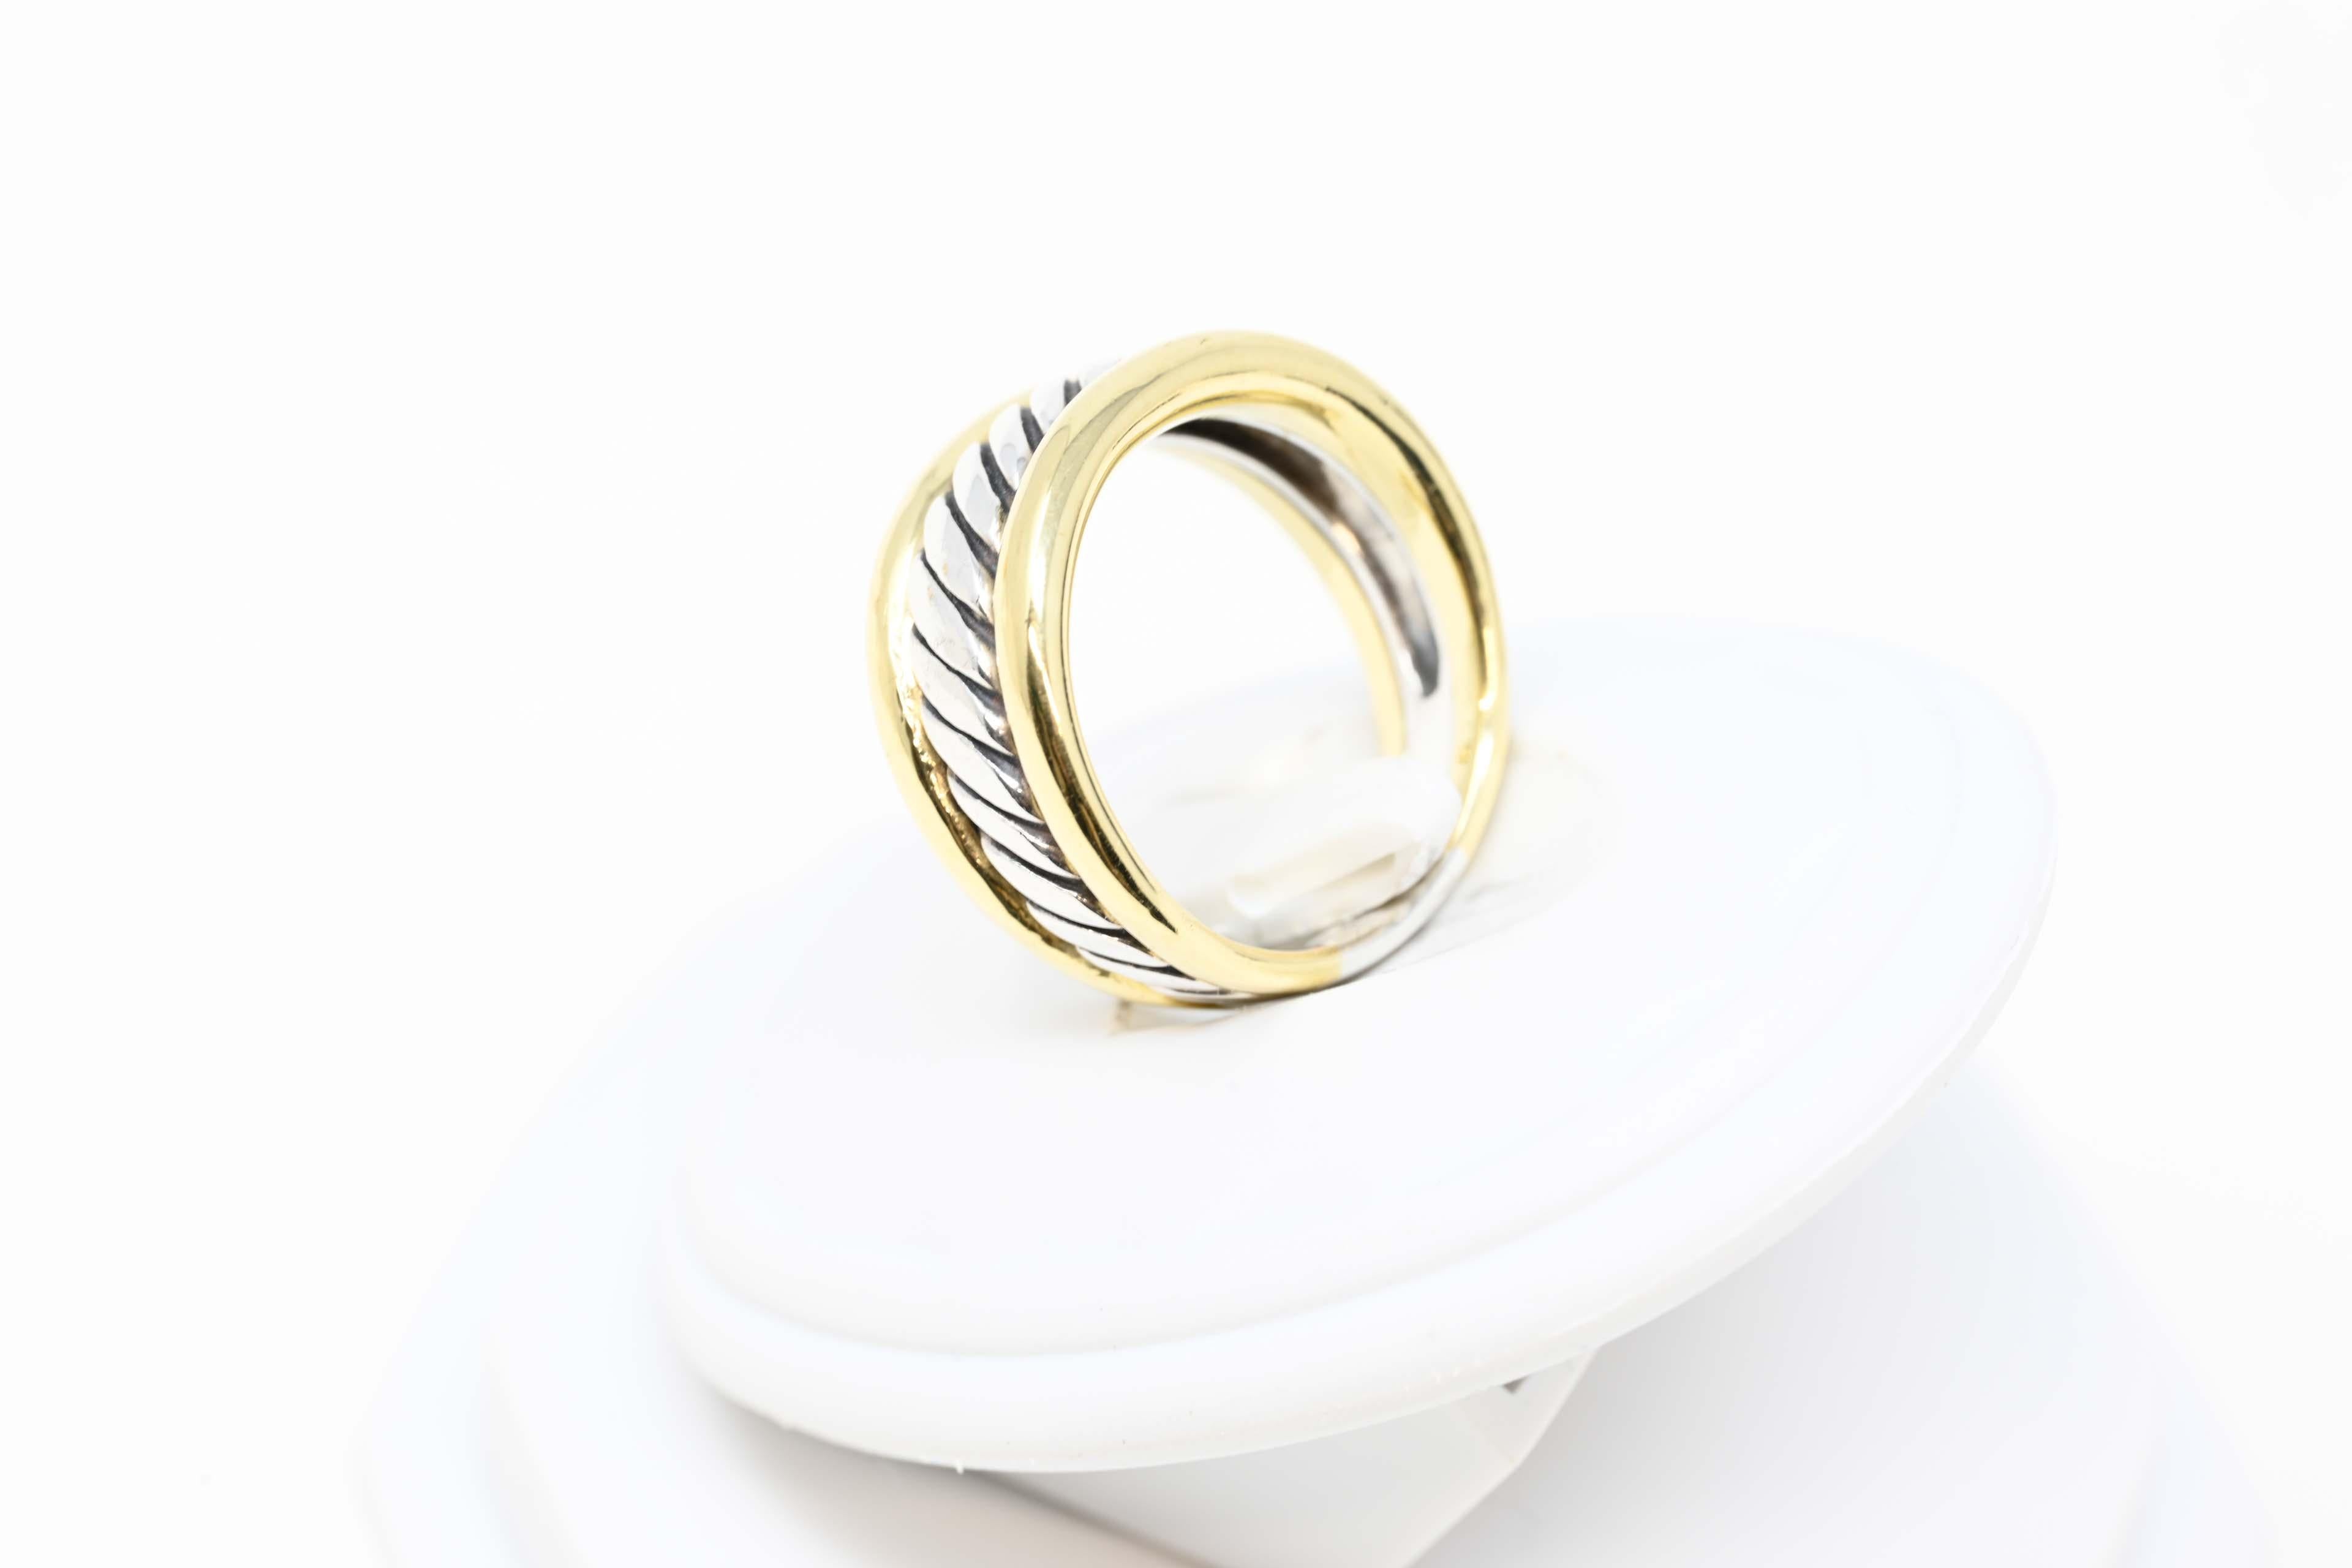 David Yurman 925 Silver & 18k Yellow Gold Thoroughbred Ring  In Good Condition For Sale In Montreal, QC